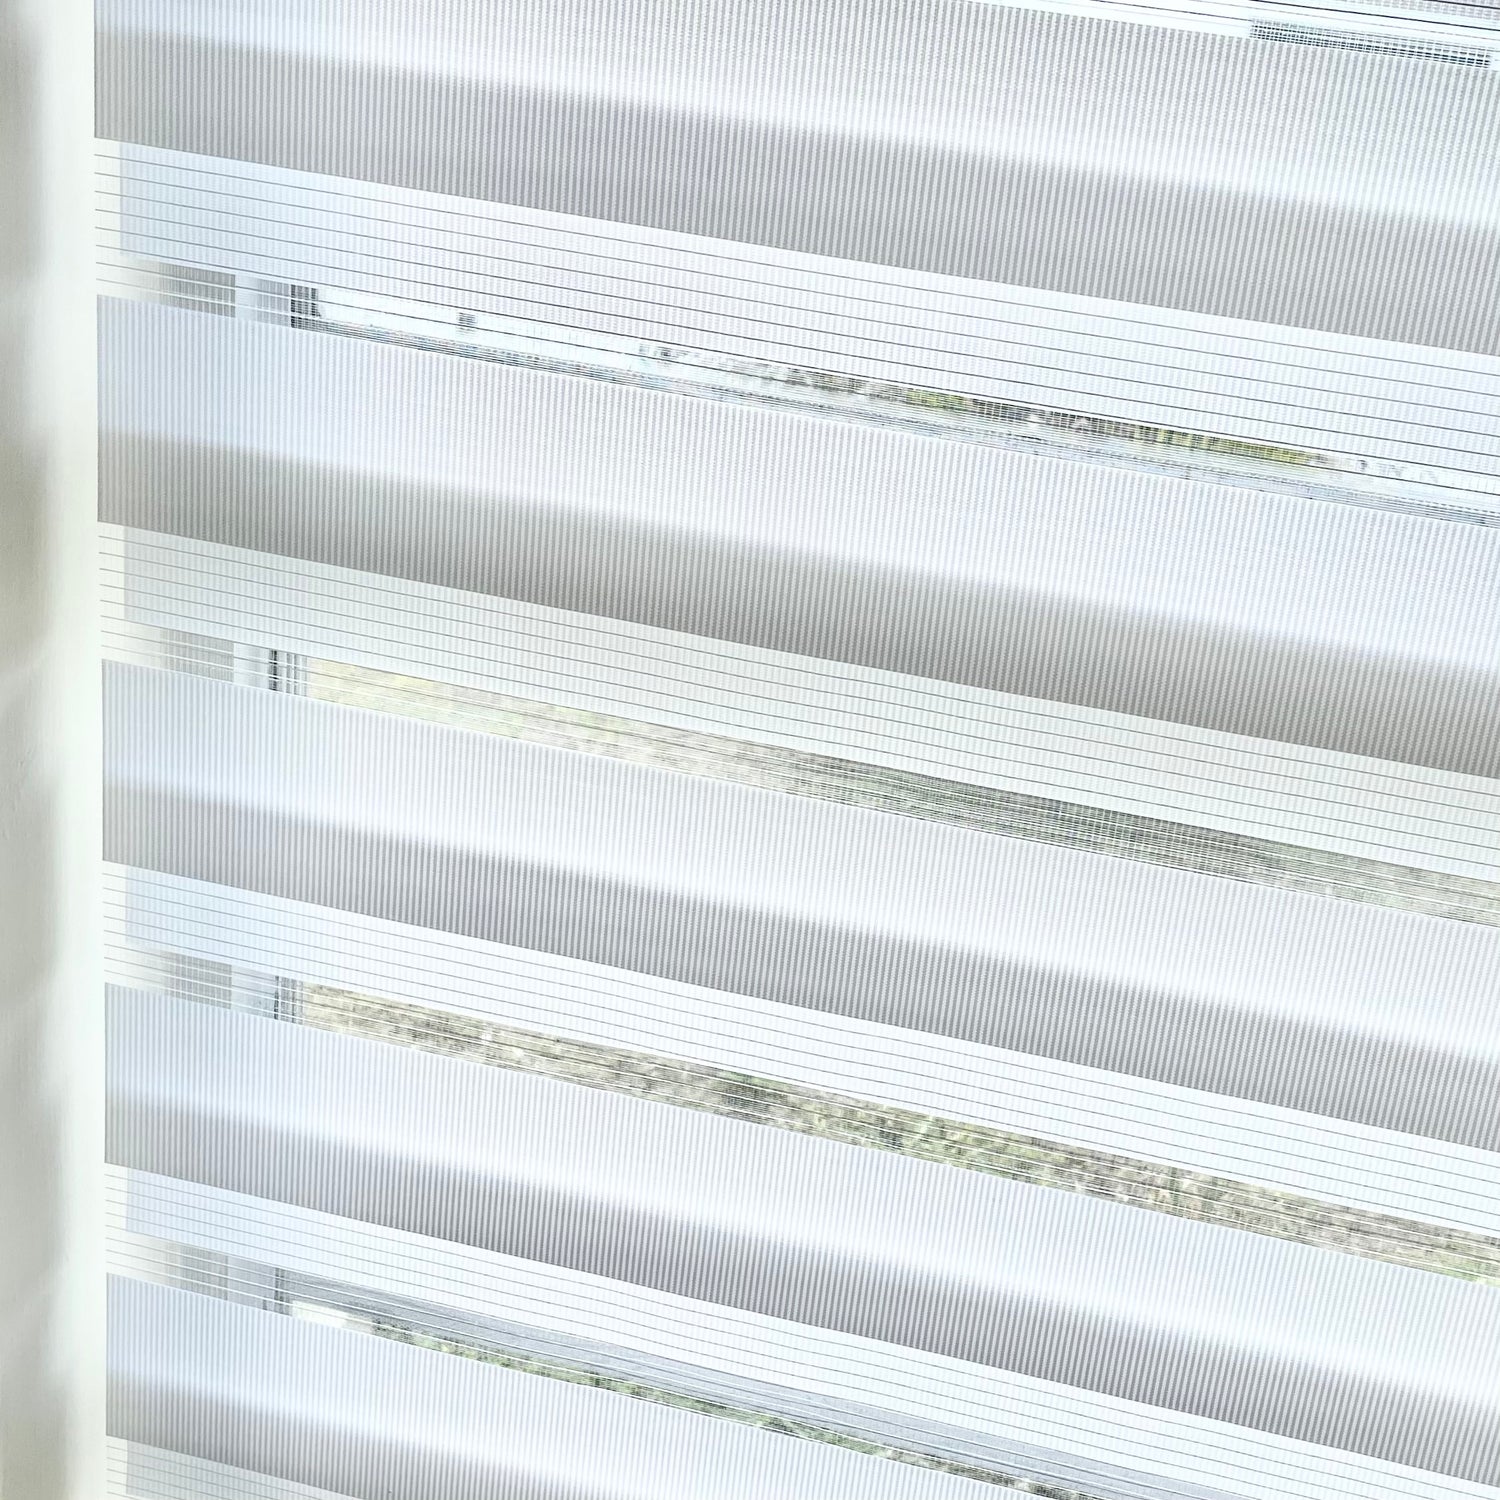 Create an airy atmosphere with this light yet durable fabric option. With its vibrant color pallet and a delicate sheer band, it will sure give your windows a trendy look. Plus it's super easy to clean and maintain – what a bonus!